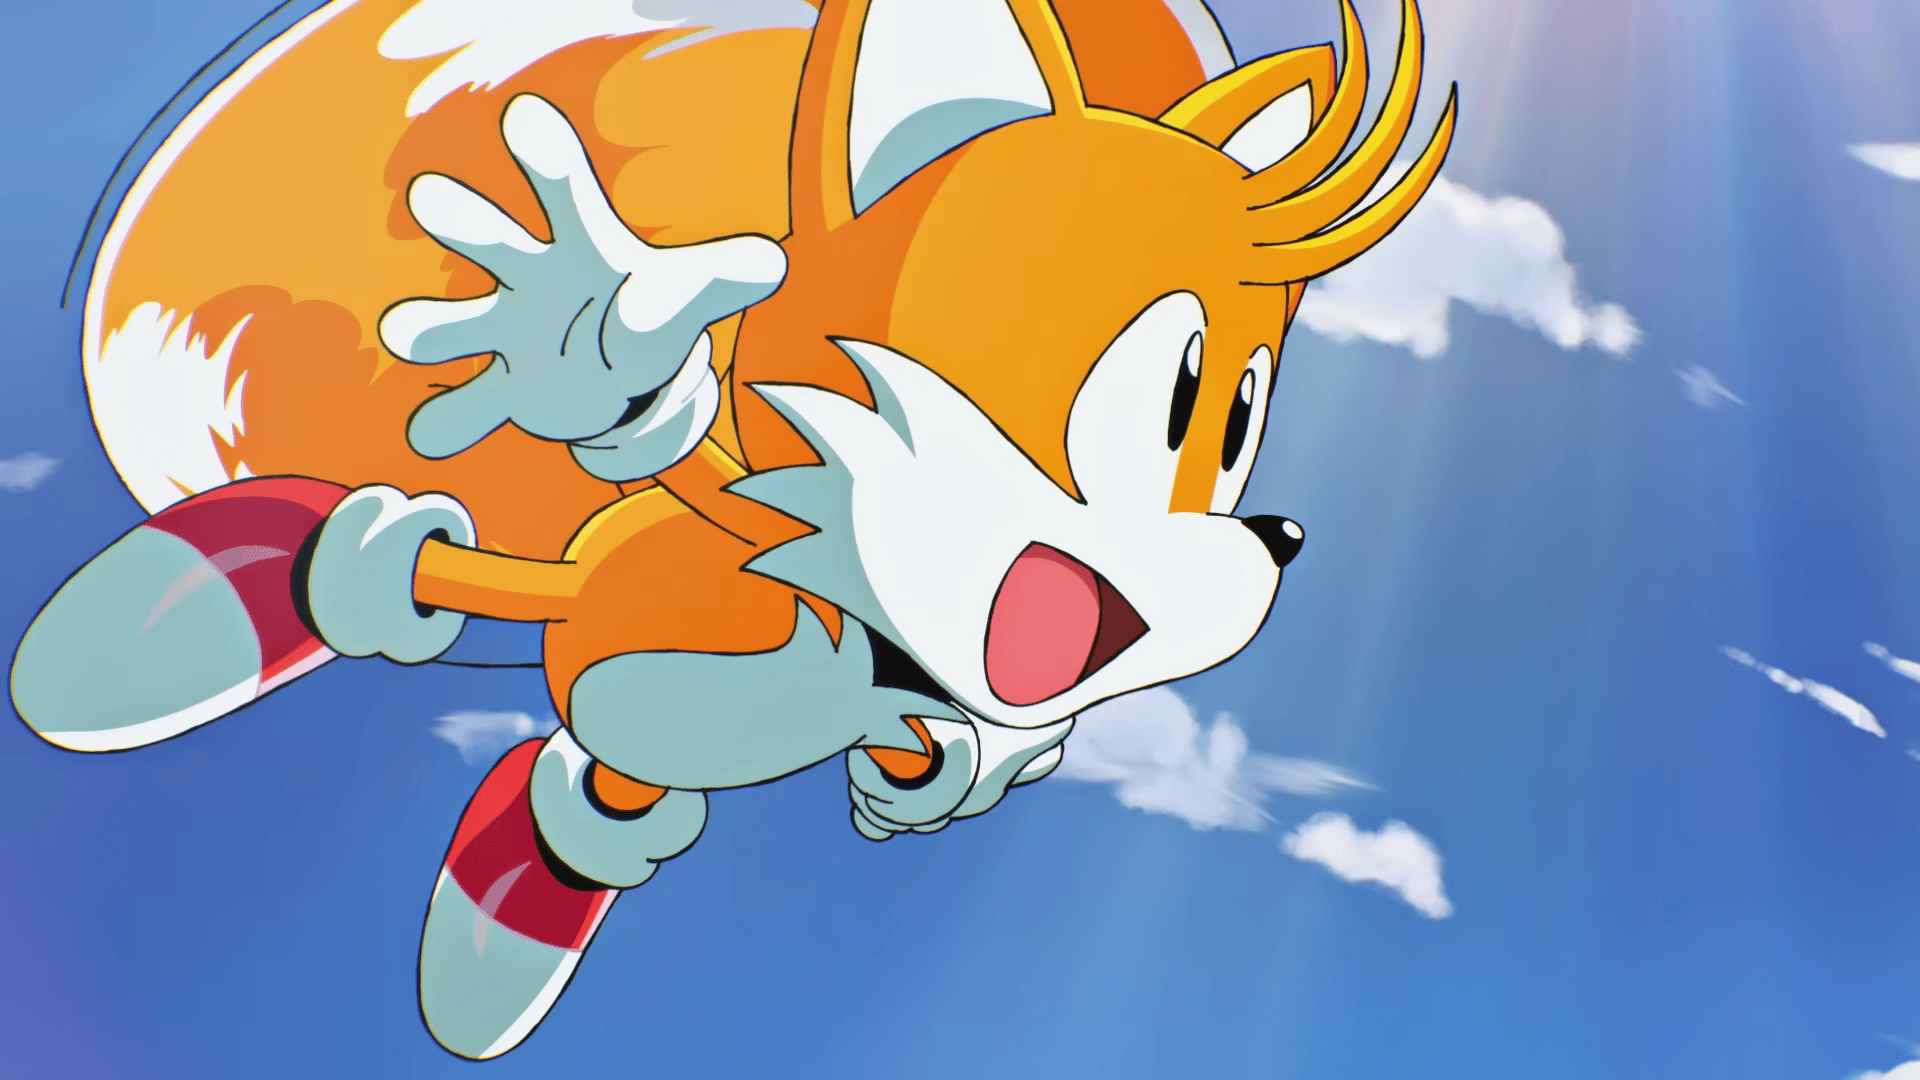 New Sonic Speed Strats Discusses Sonic 2; Hidden Palace Zone, Playable Tails & Knuckles + More